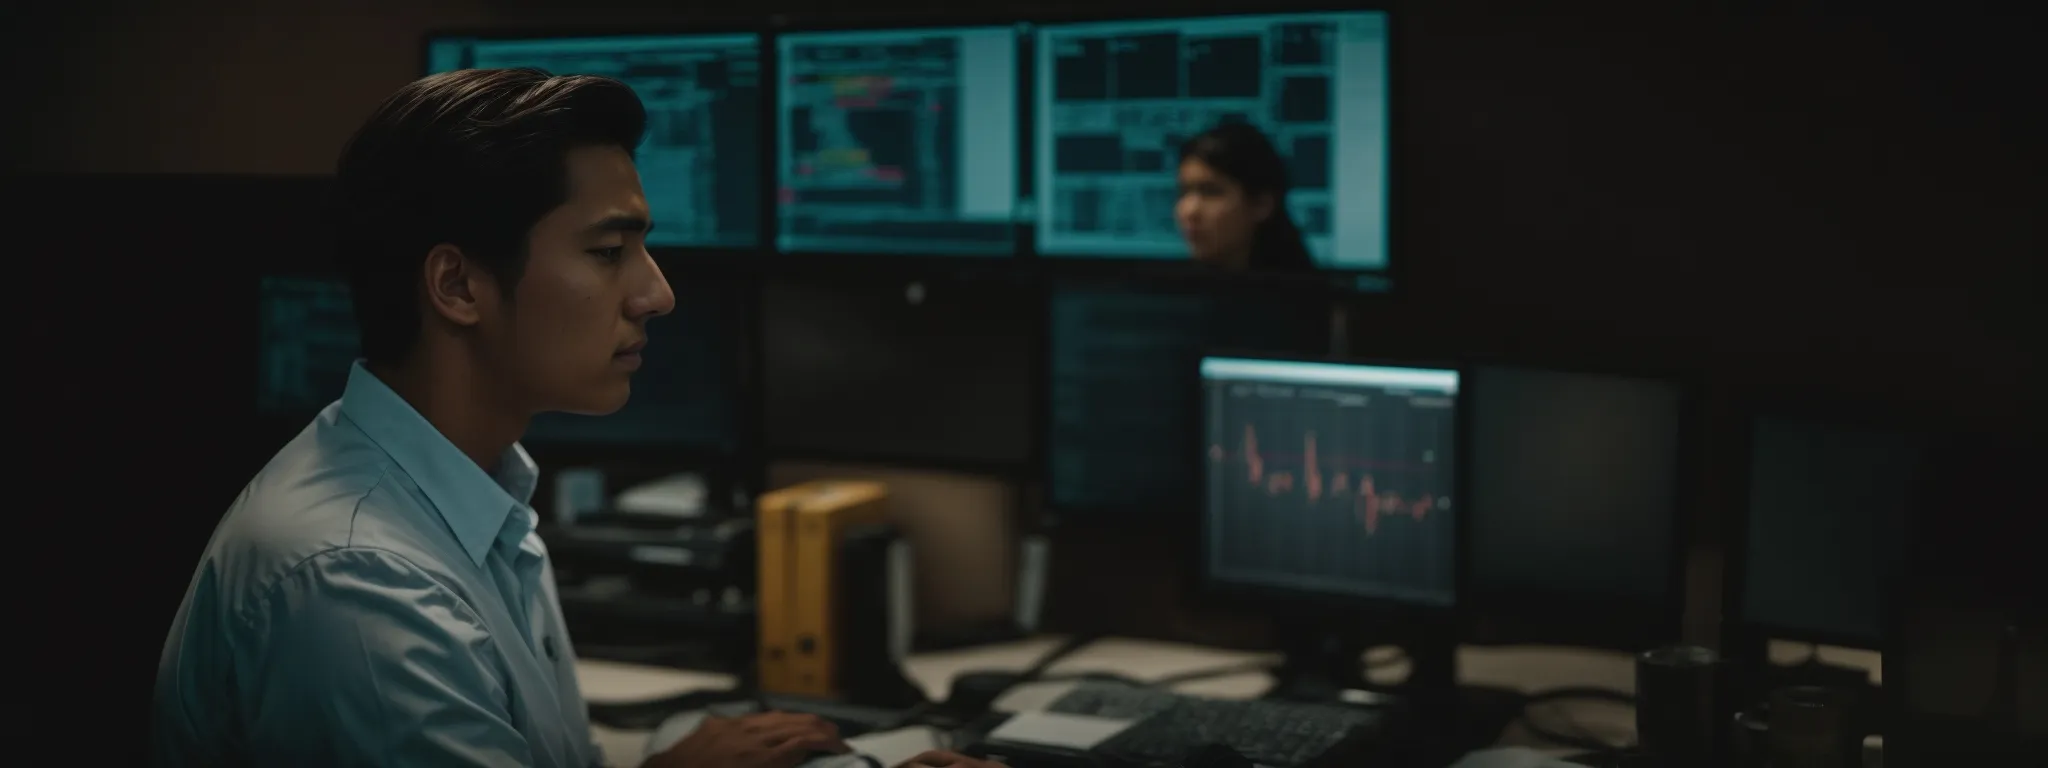 a focused individual analyzes complex data on a large, high-resolution computer monitor, strategizing in an office environment.